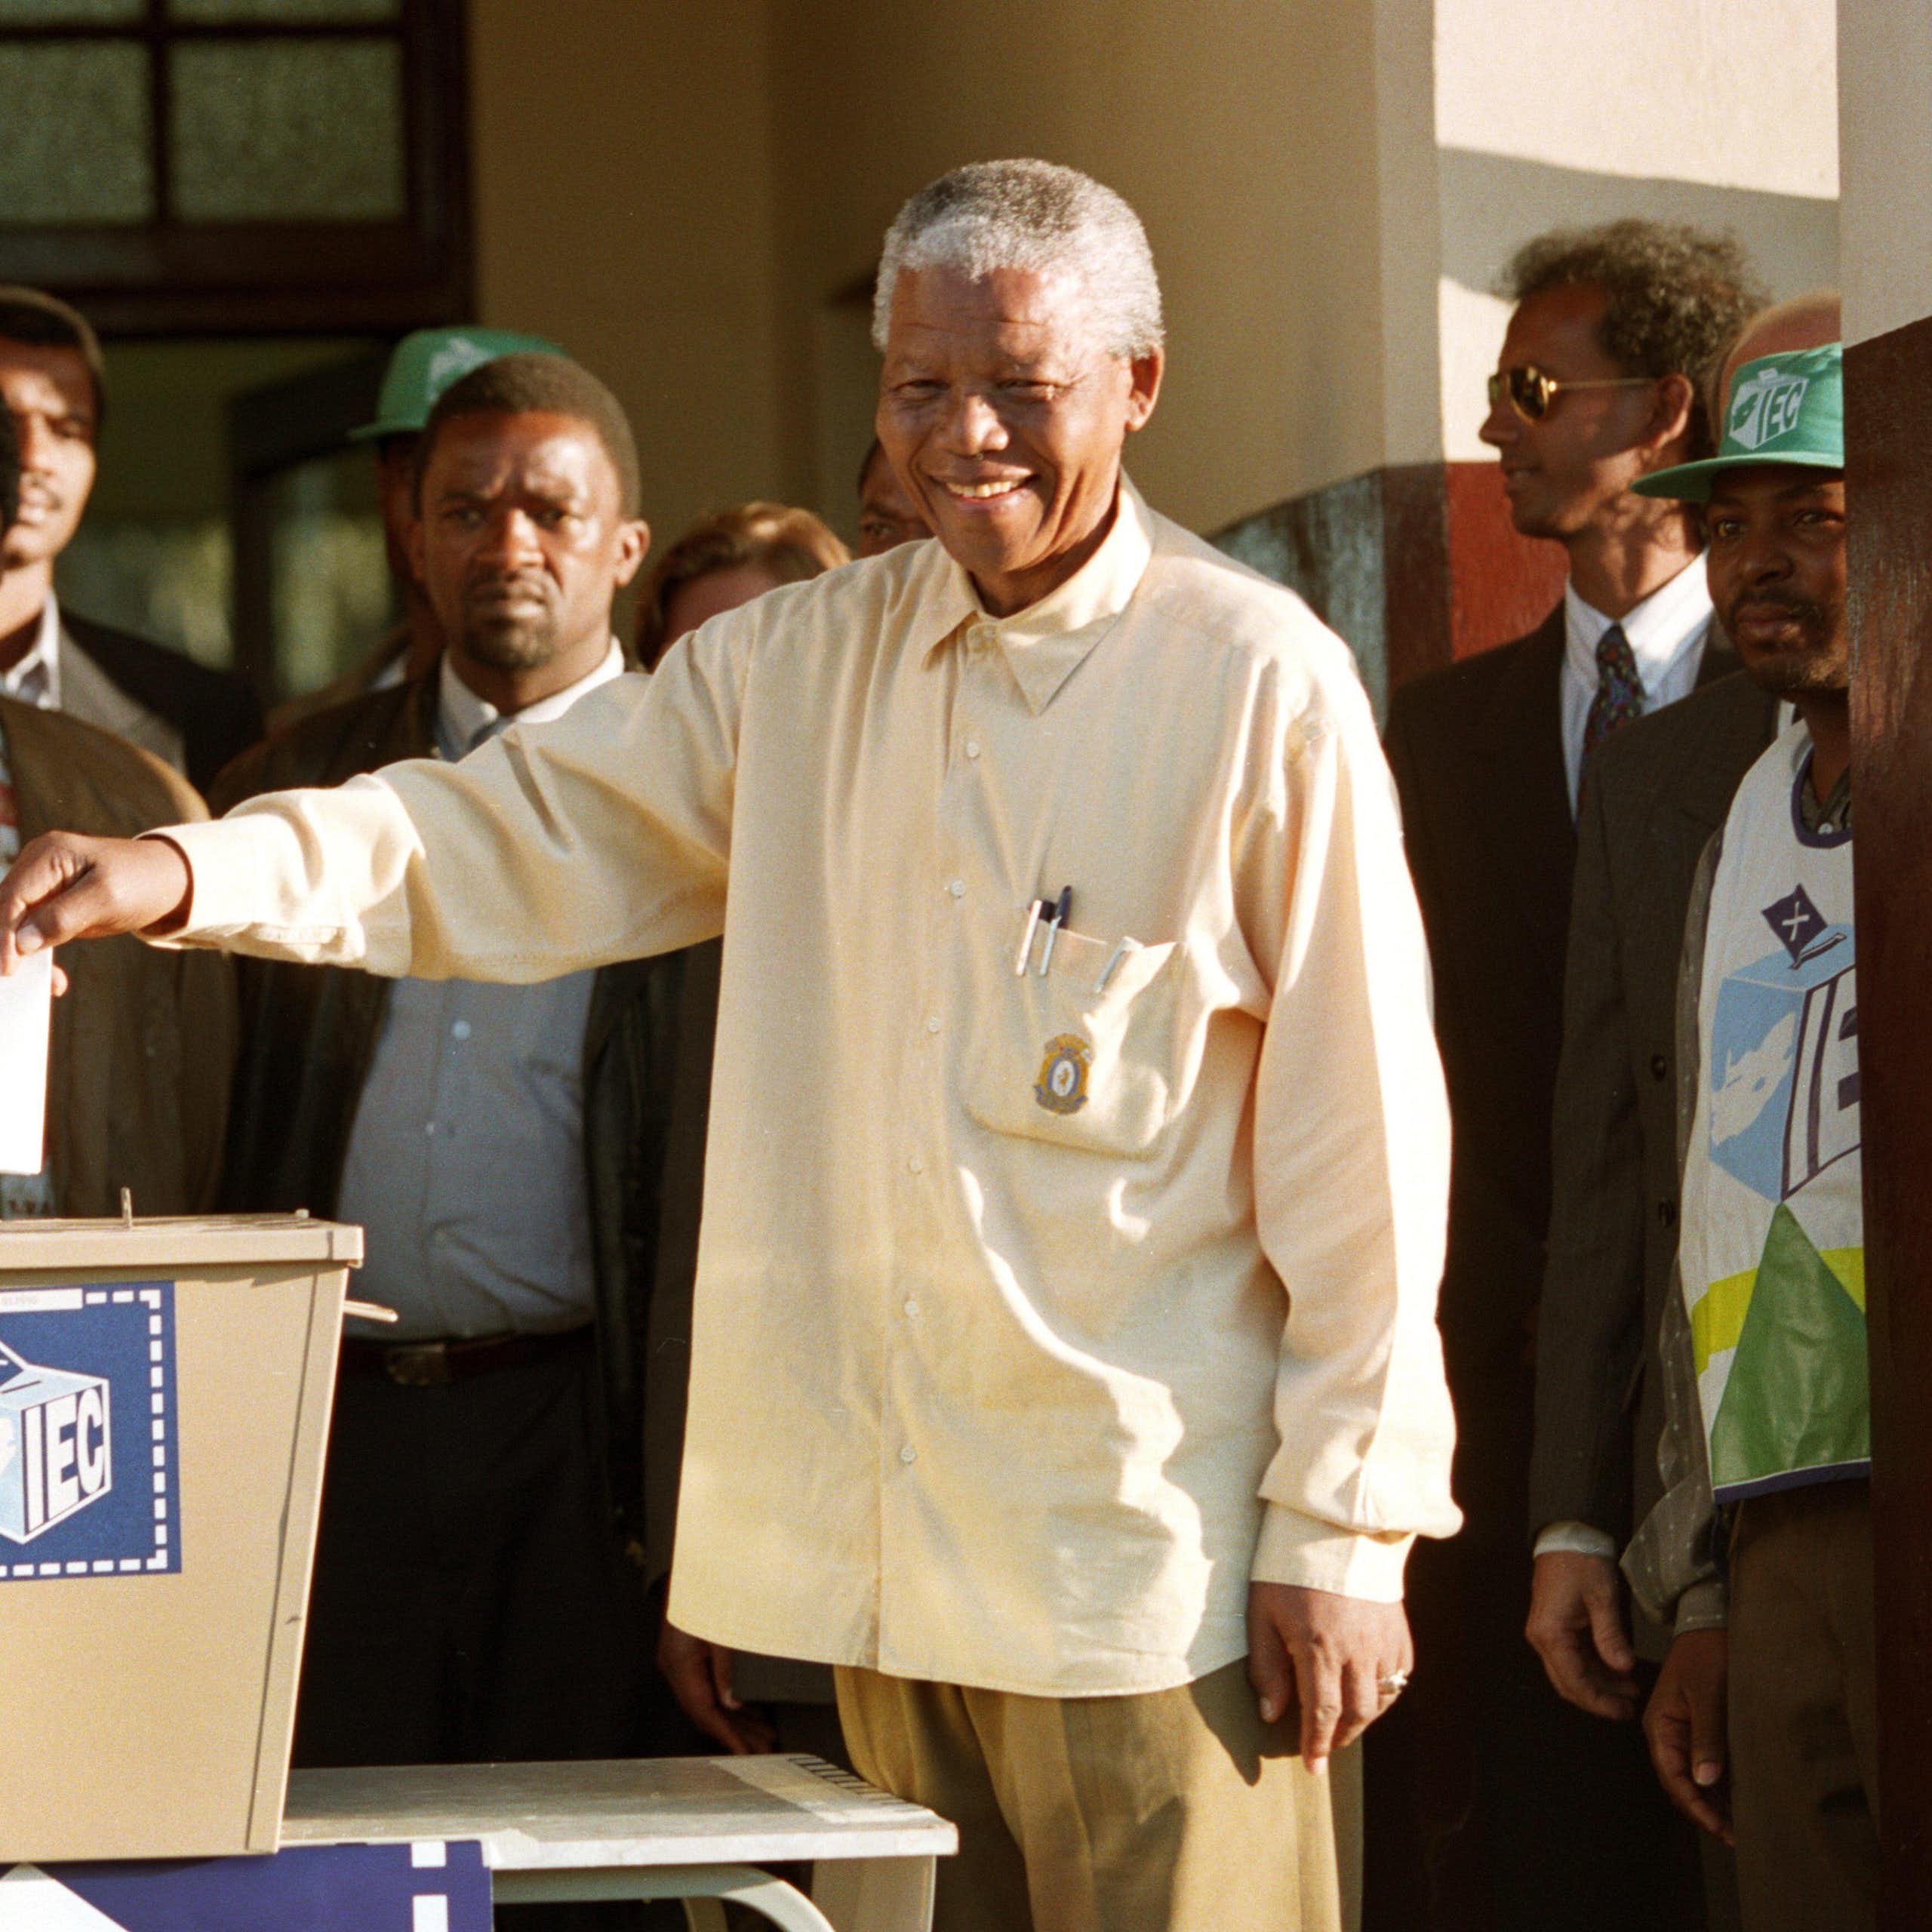 A grey-haired and smiling man wearing a loose long-sleeved shirt holds a piece of paper above a ballot box, while other people stand around him